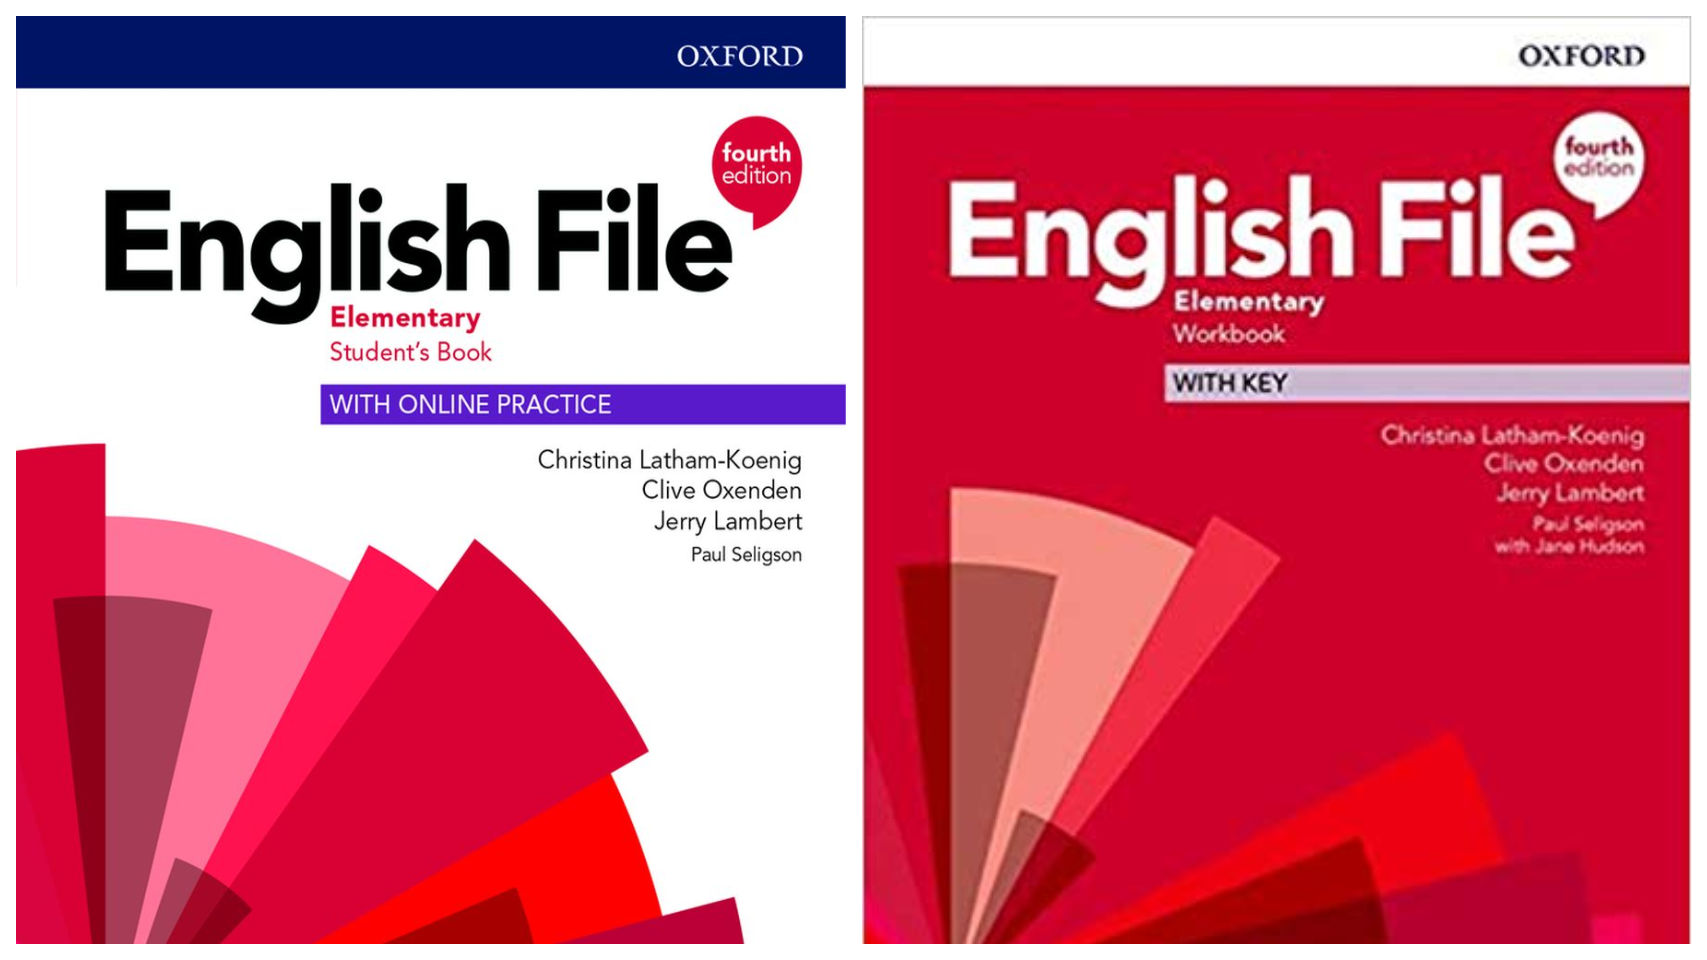 English File (4th edition) Elementary Student's Book with Online Practice + Workbook with key